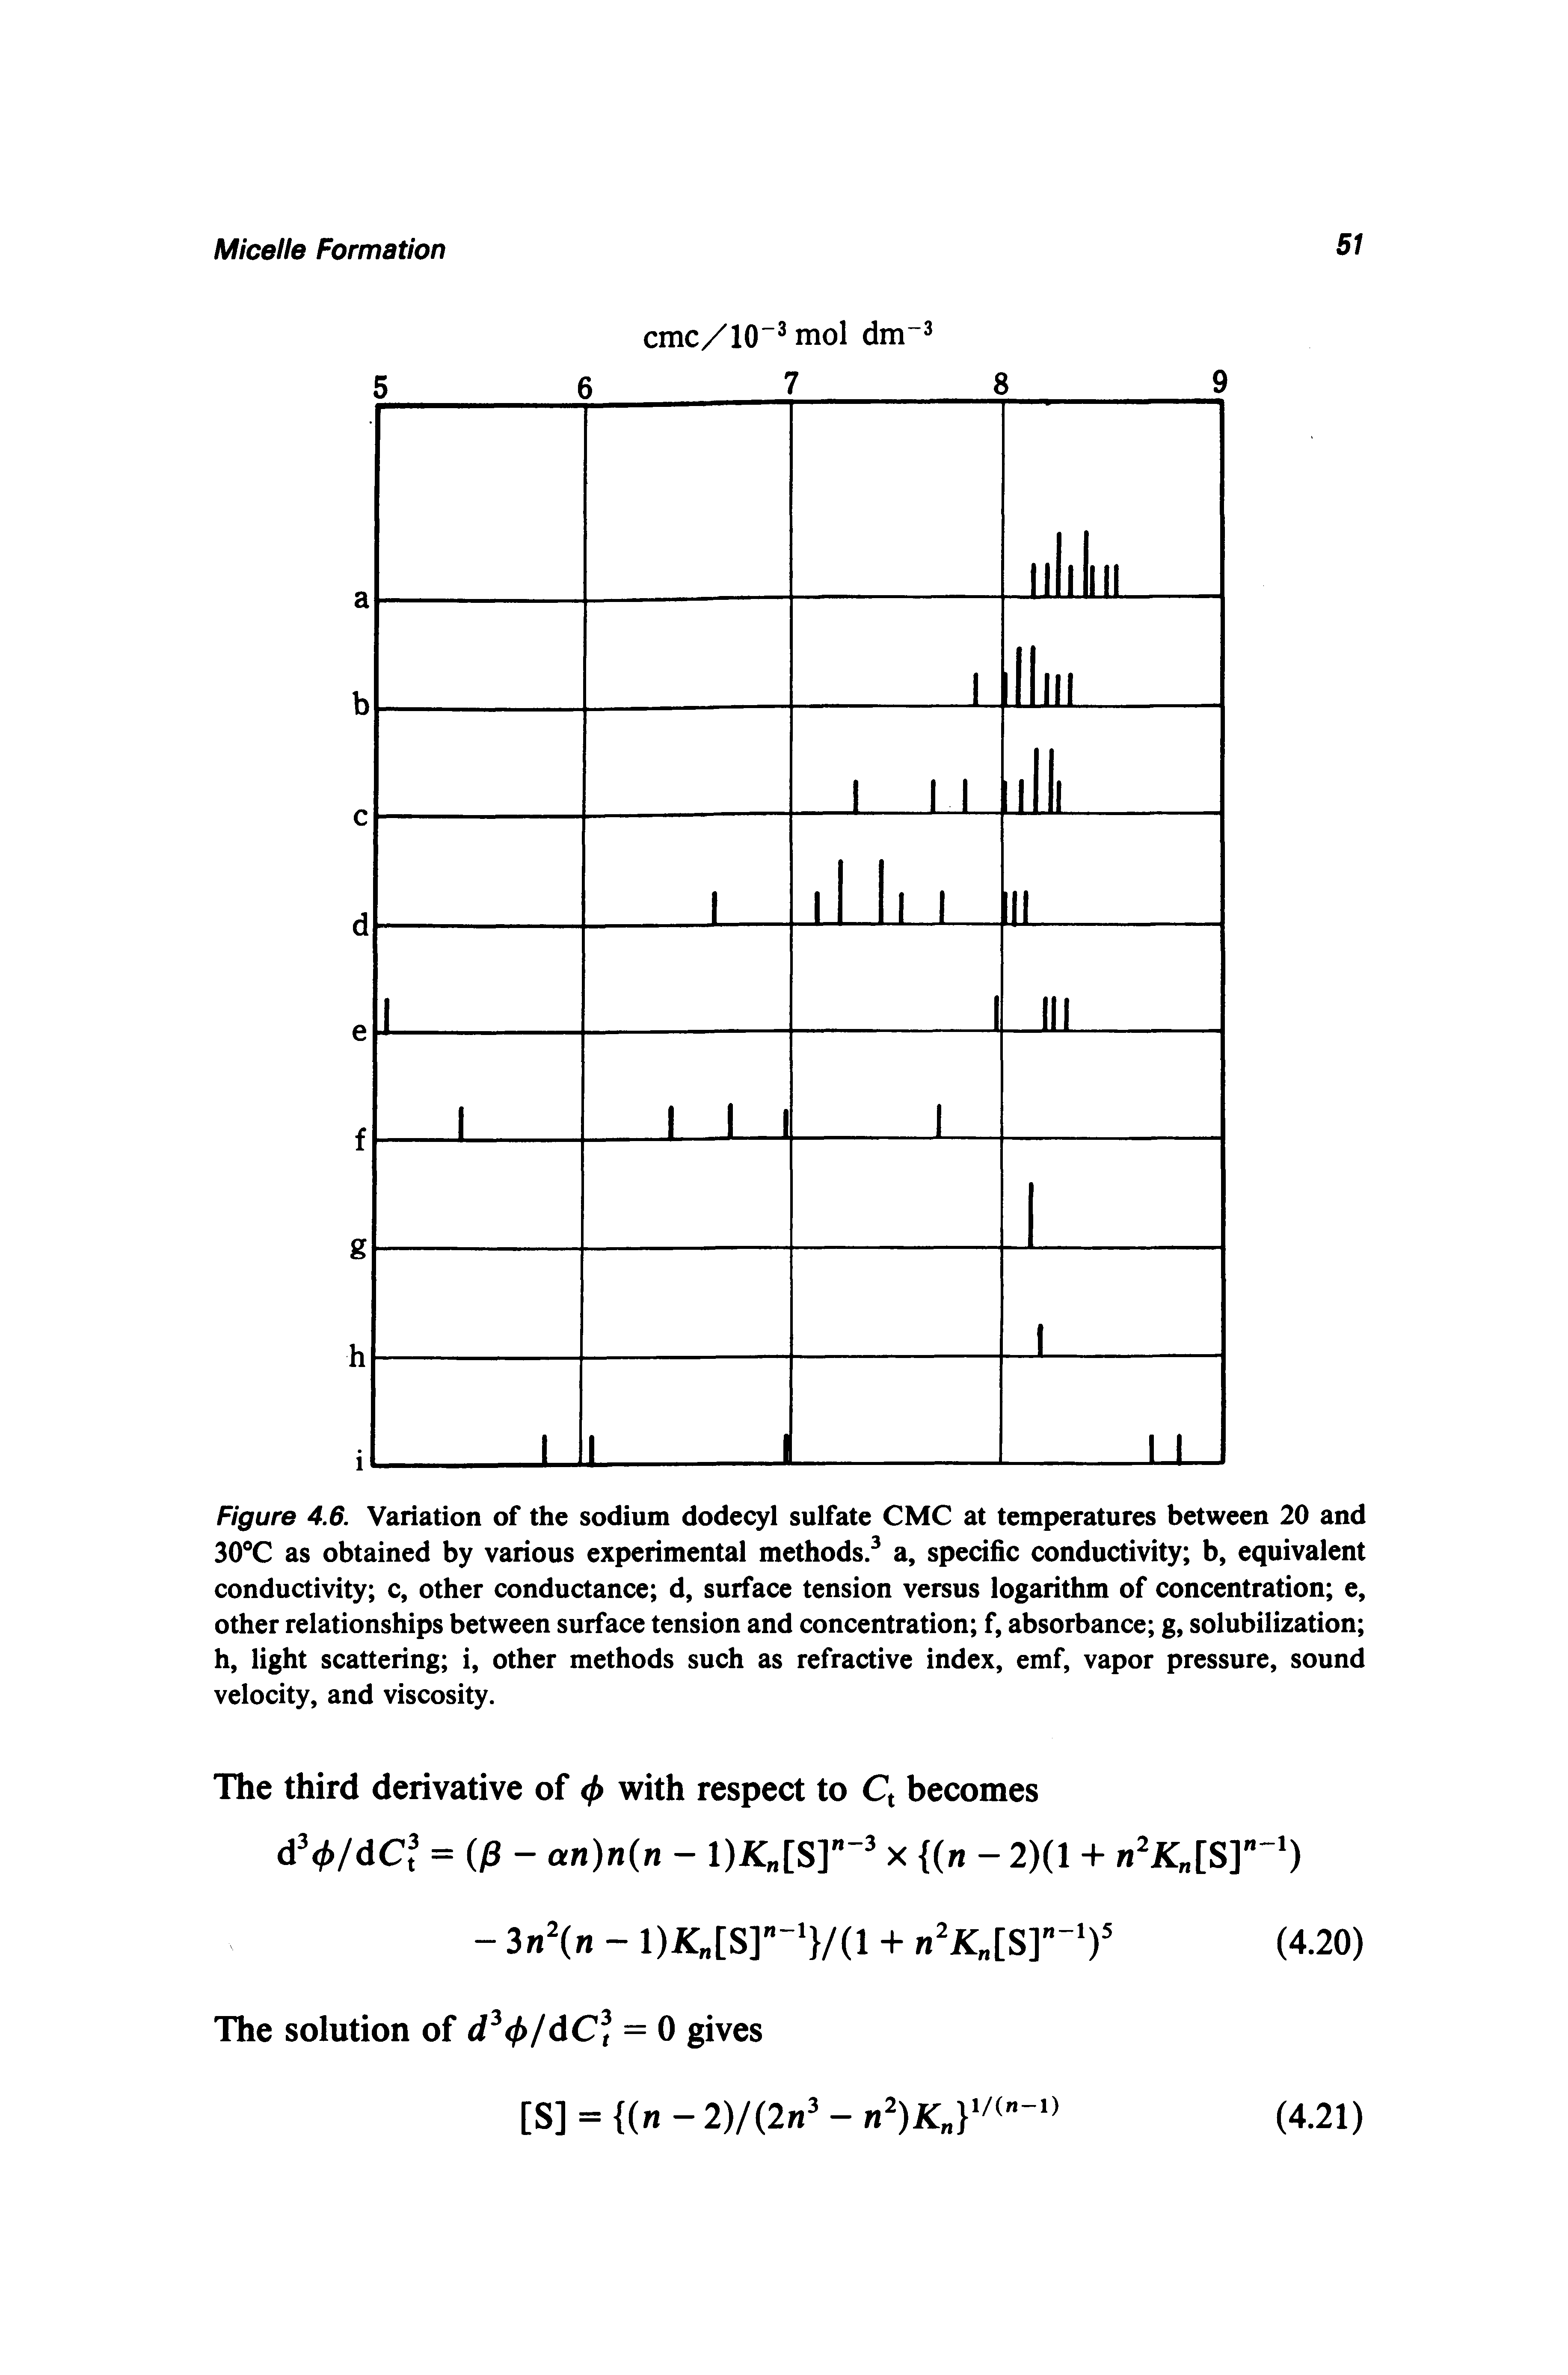 Figure 4.6. Variation of the sodium dodecyl sulfate CMC at temperatures between 20 and 30 C as obtained by various experimental methods. a, specific conductivity b, equivalent conductivity c, other conductance d, surface tension versus logarithm of concentration e, other relationships between surface tension and concentration f, absorbance g, solubilization h, light scattering i, other methods such as refractive index, emf, vapor pressure, sound velocity, and viscosity.